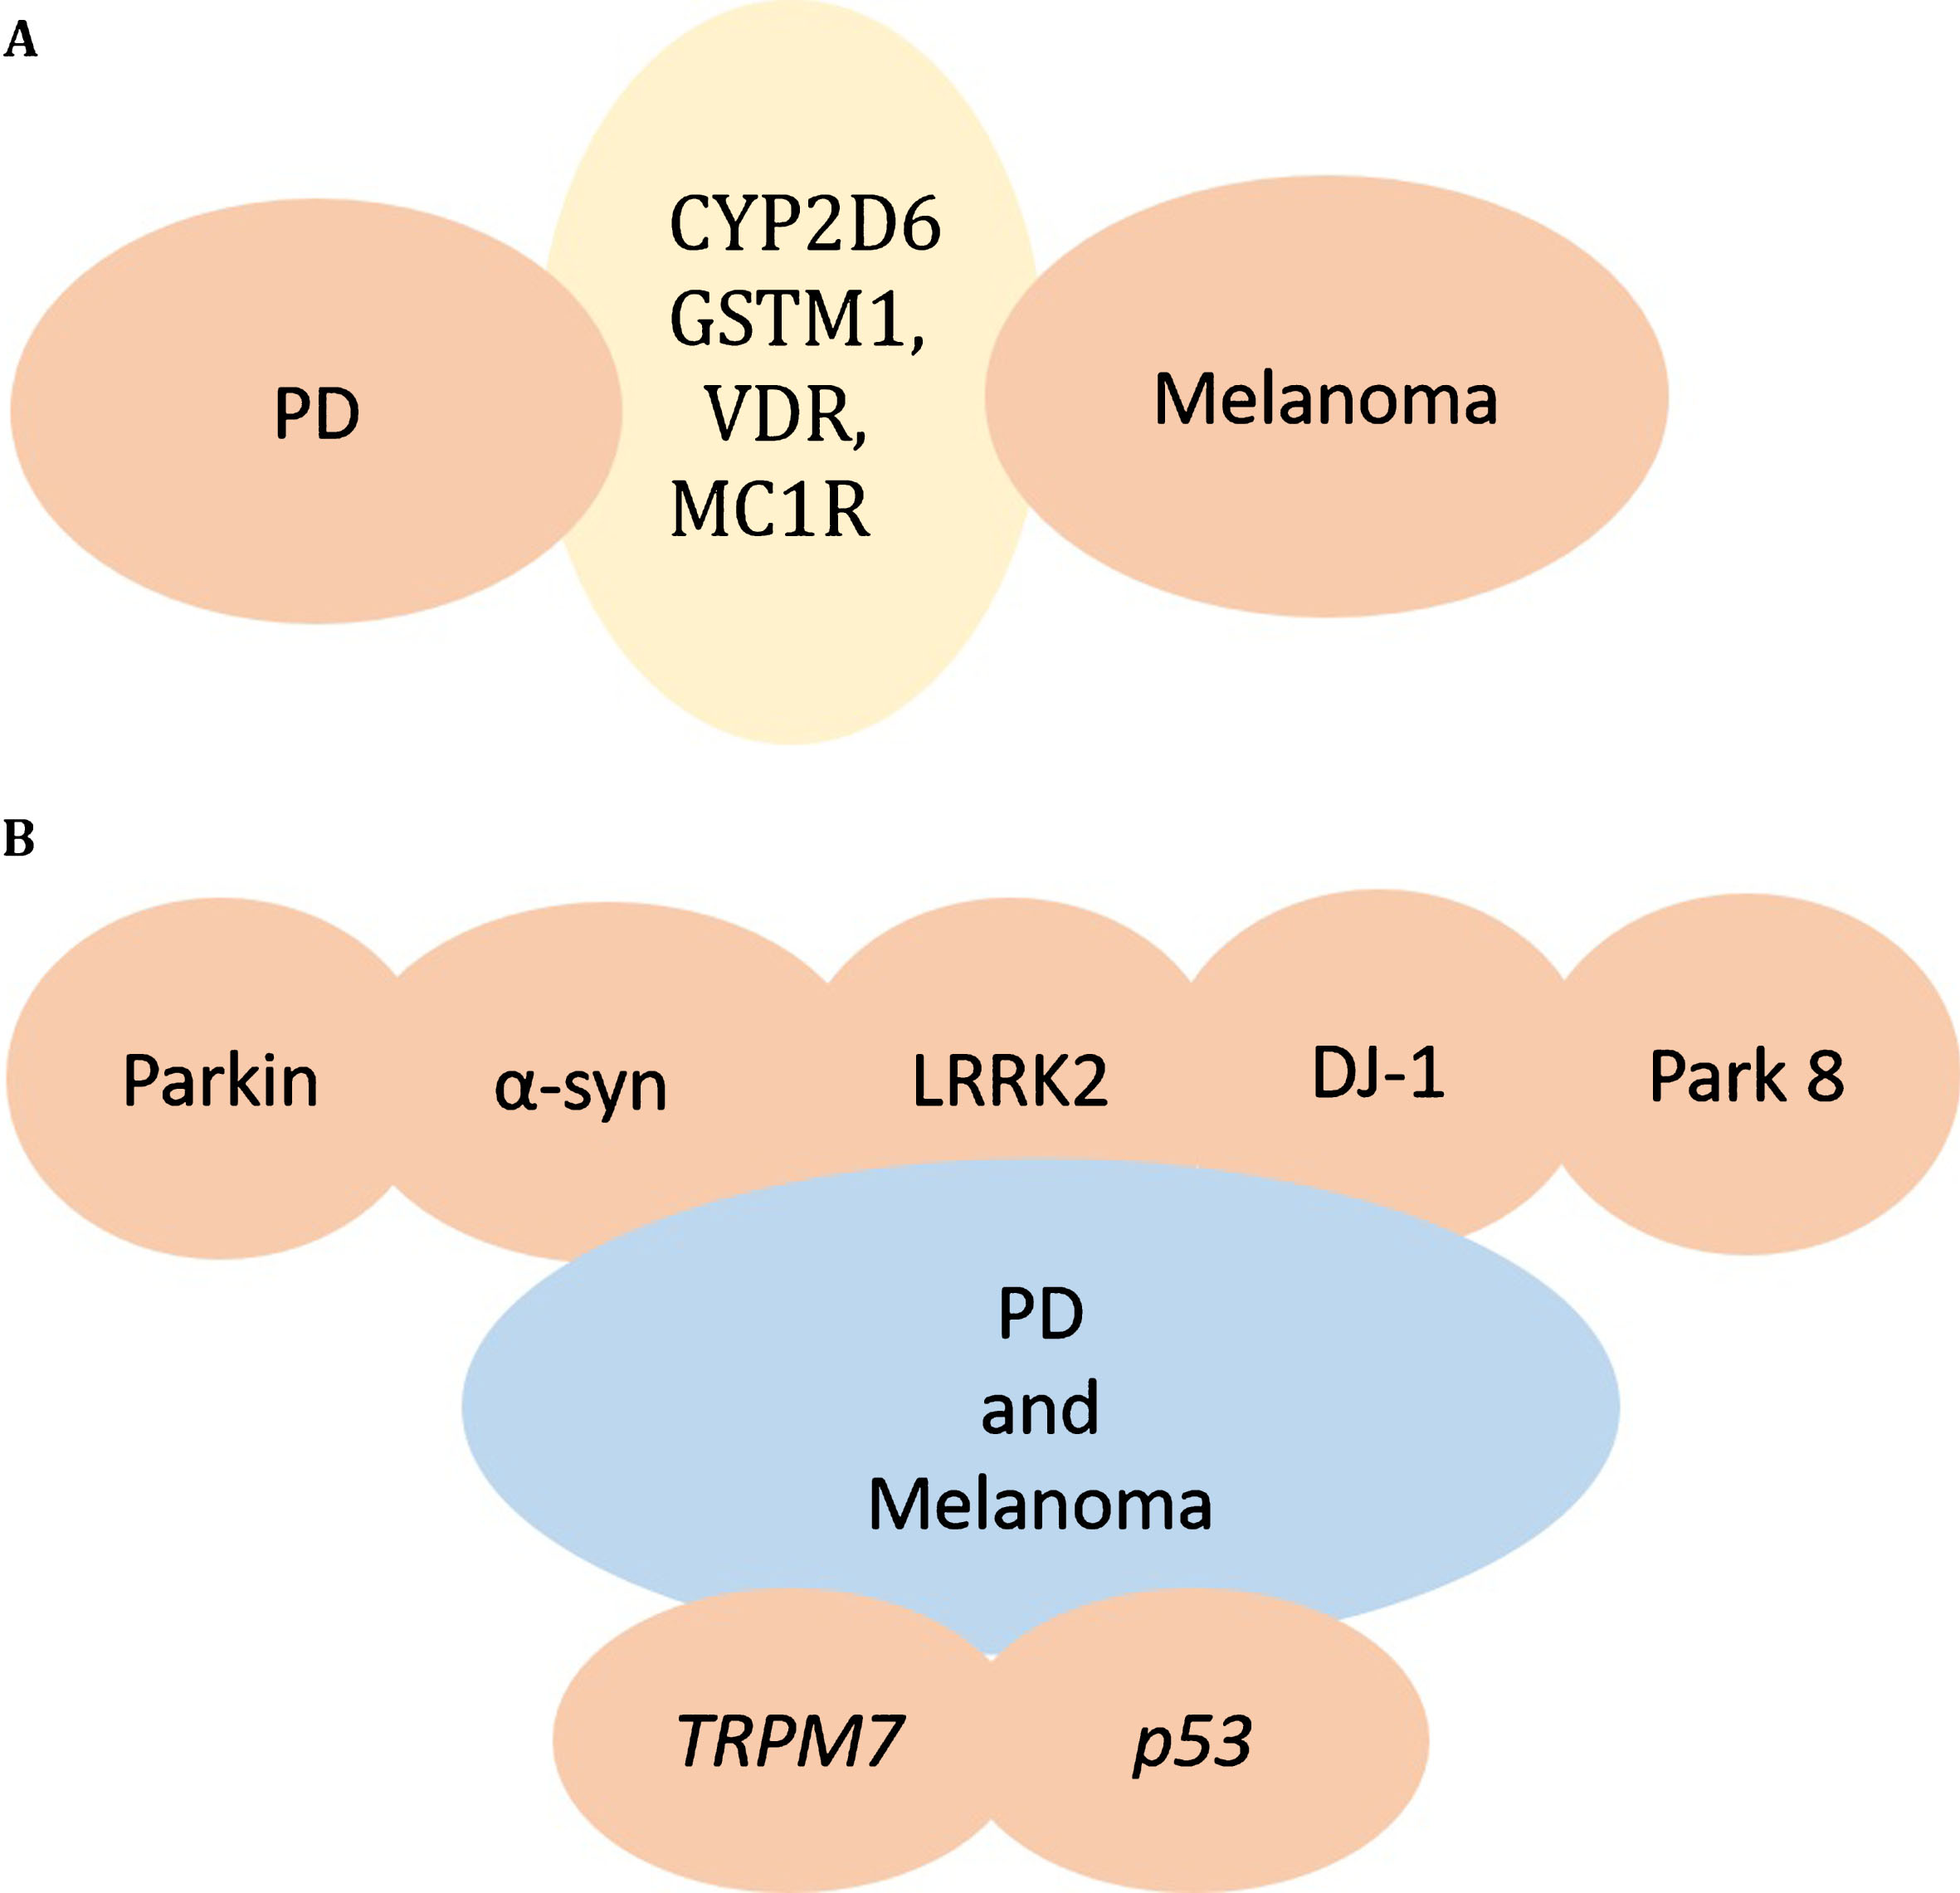 Genes responsible for melanoma and PD. A) CYP2D6 or GSTM1, VDR, MC1R gene alterations are found in both PD and Melanoma, providing a potential link between PD and Melanoma. B) Mutations in parkin, α-synuclein, LRRK2, DJ-1, and other PARK genes may underlie the co-occurrence of PD and Melanoma. TRPM7 and p53 are additional genes altered in PD and melanoma.